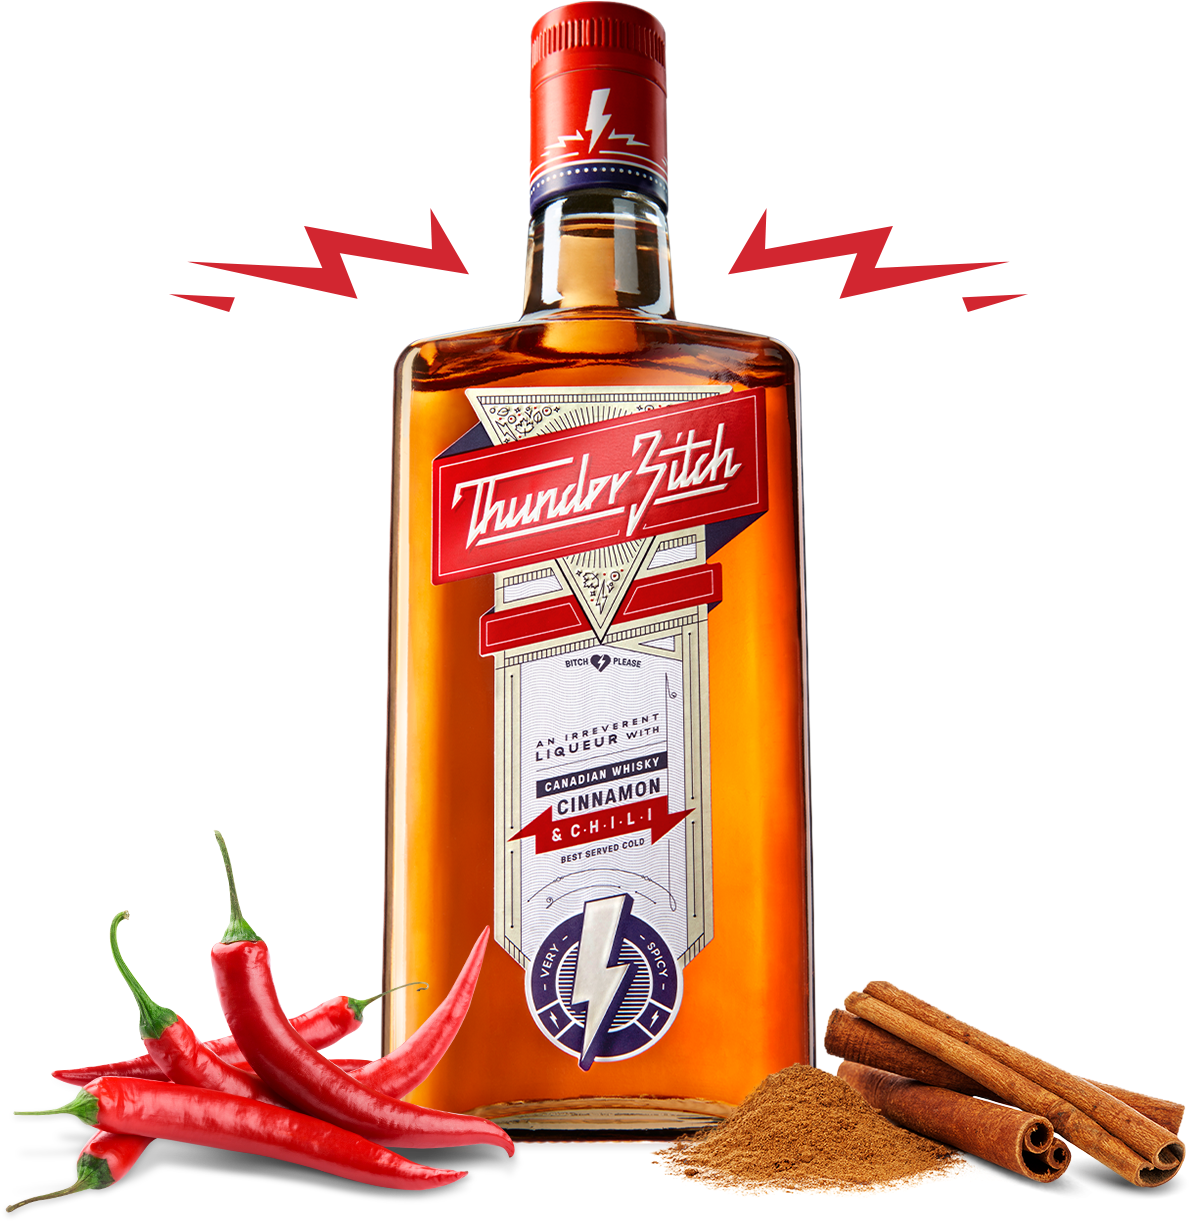 A Bottle Of Liquor Next To Chili Peppers And Cinnamon